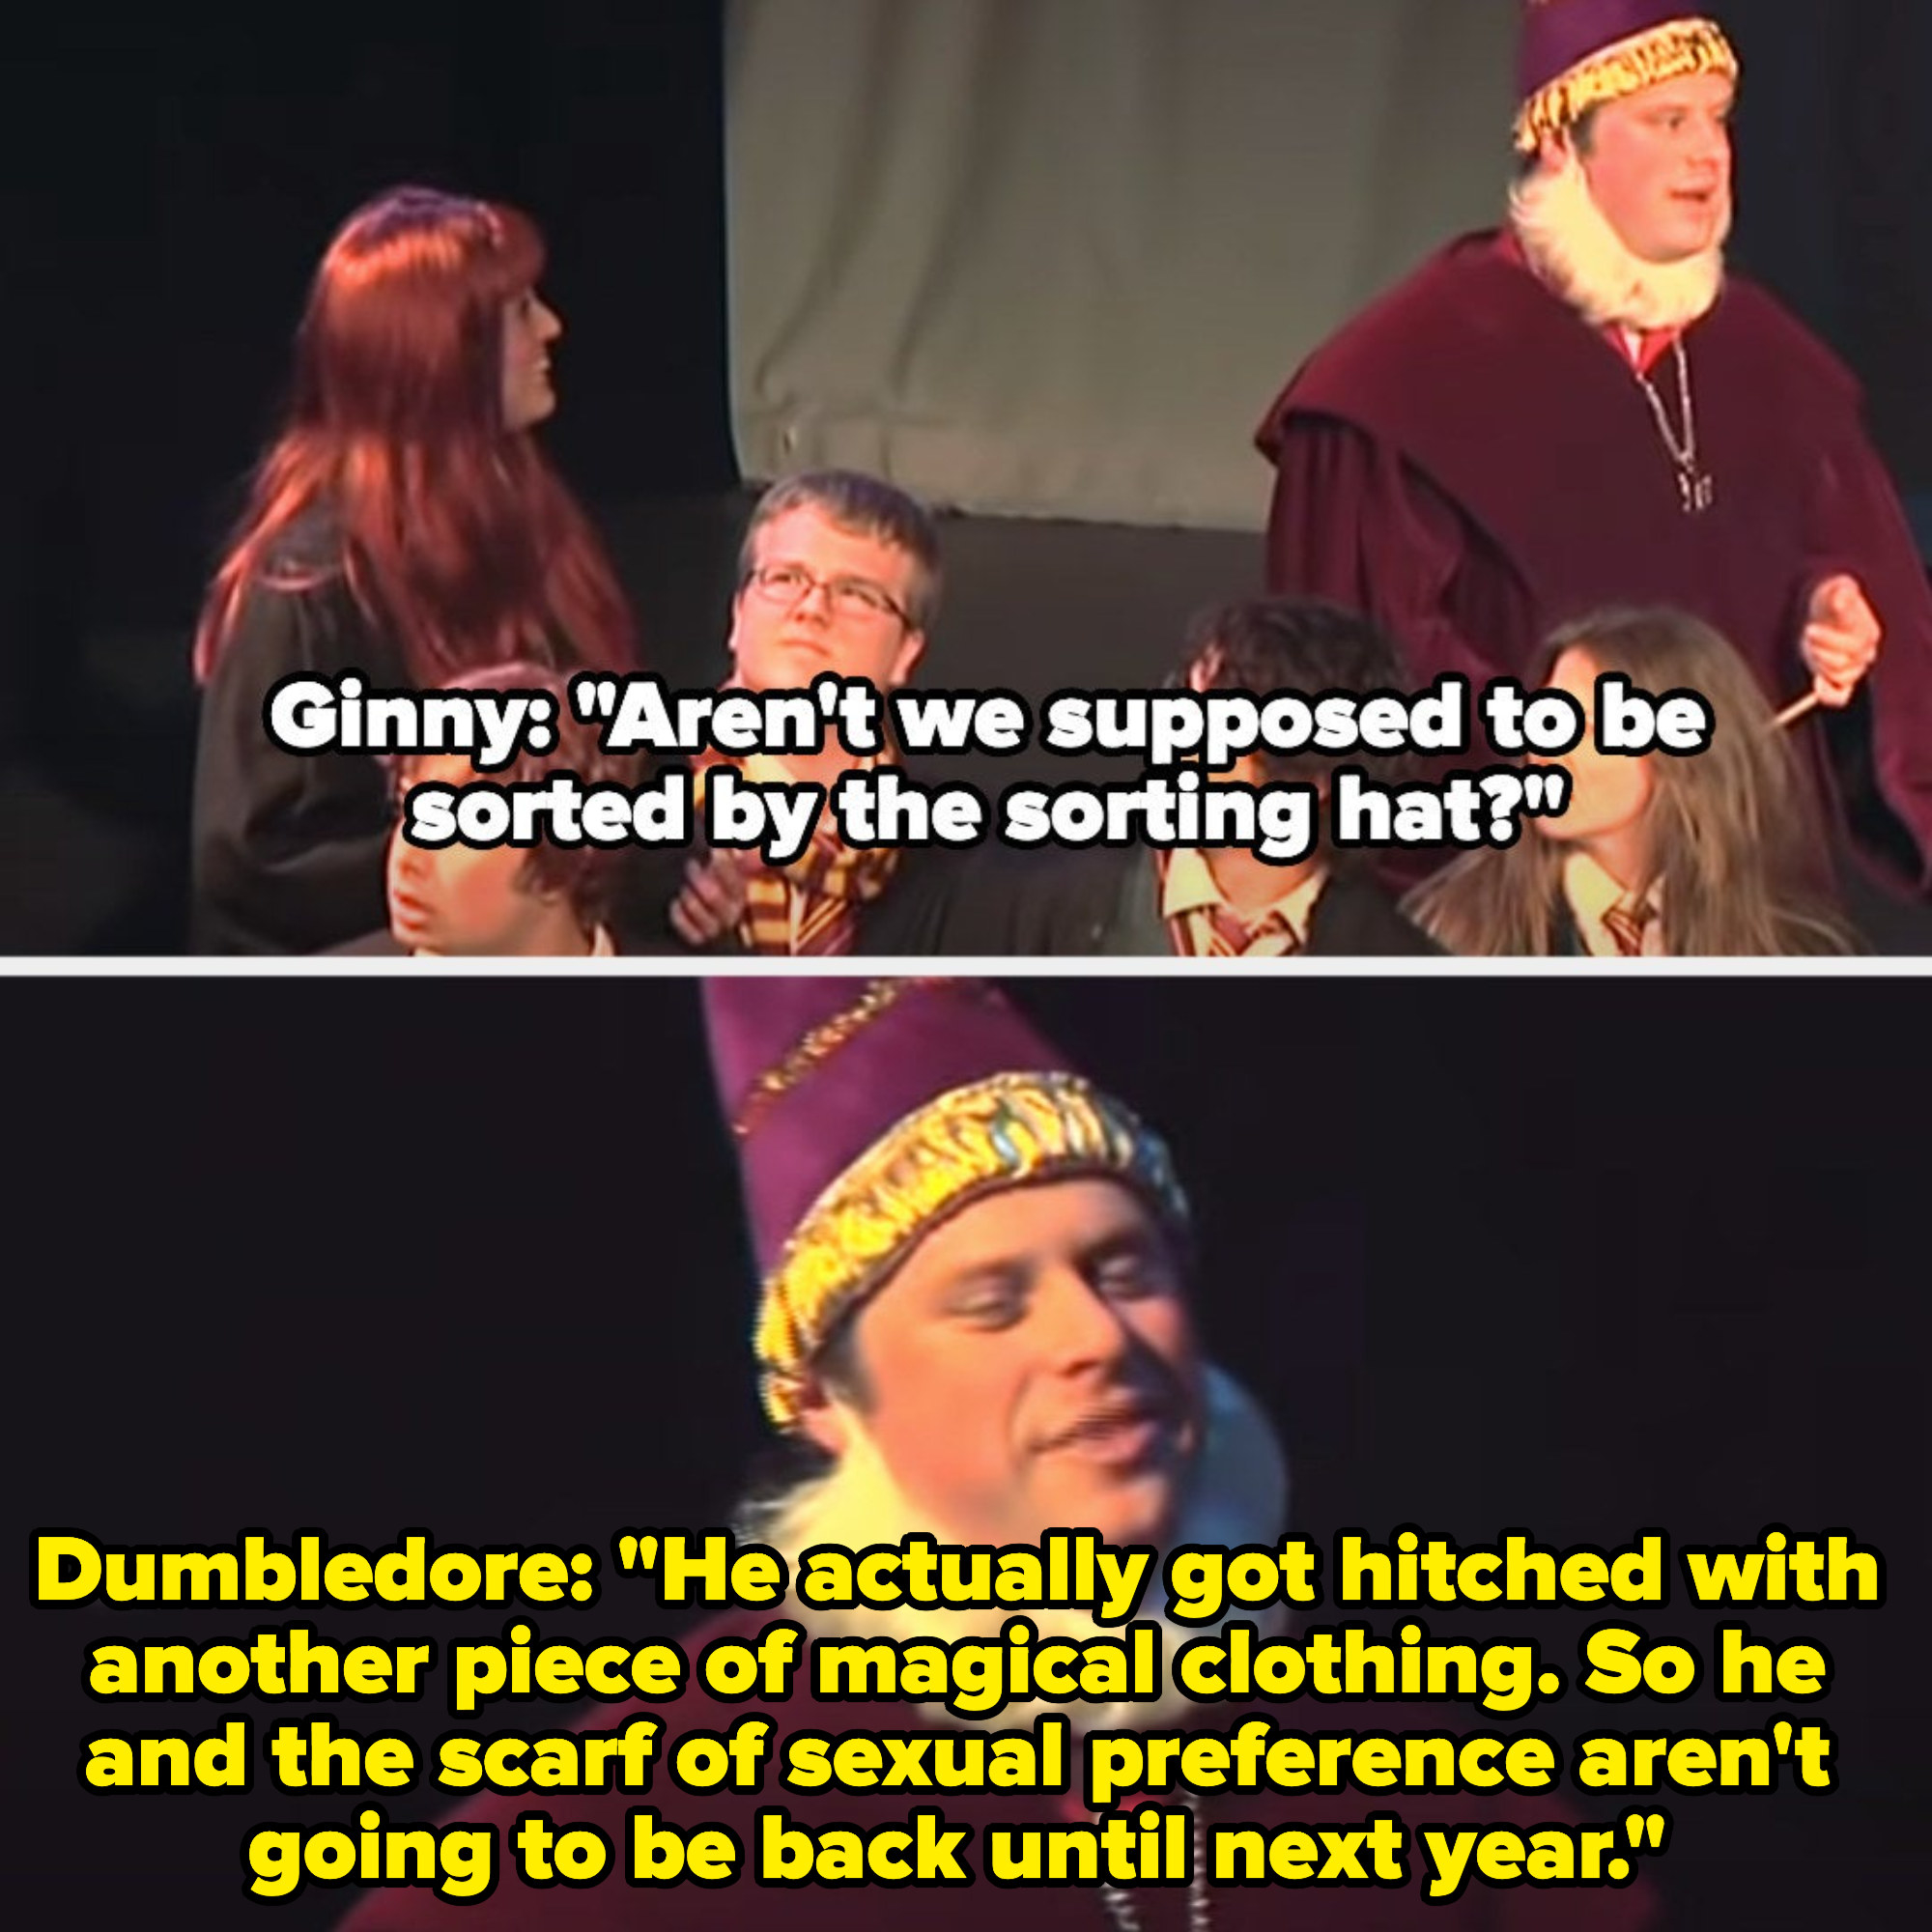 Ginny asks if they&#x27;re supposed to use the sorting hat, and Dumbledore says the sorting hat got hitched to the scarf of sexual preference